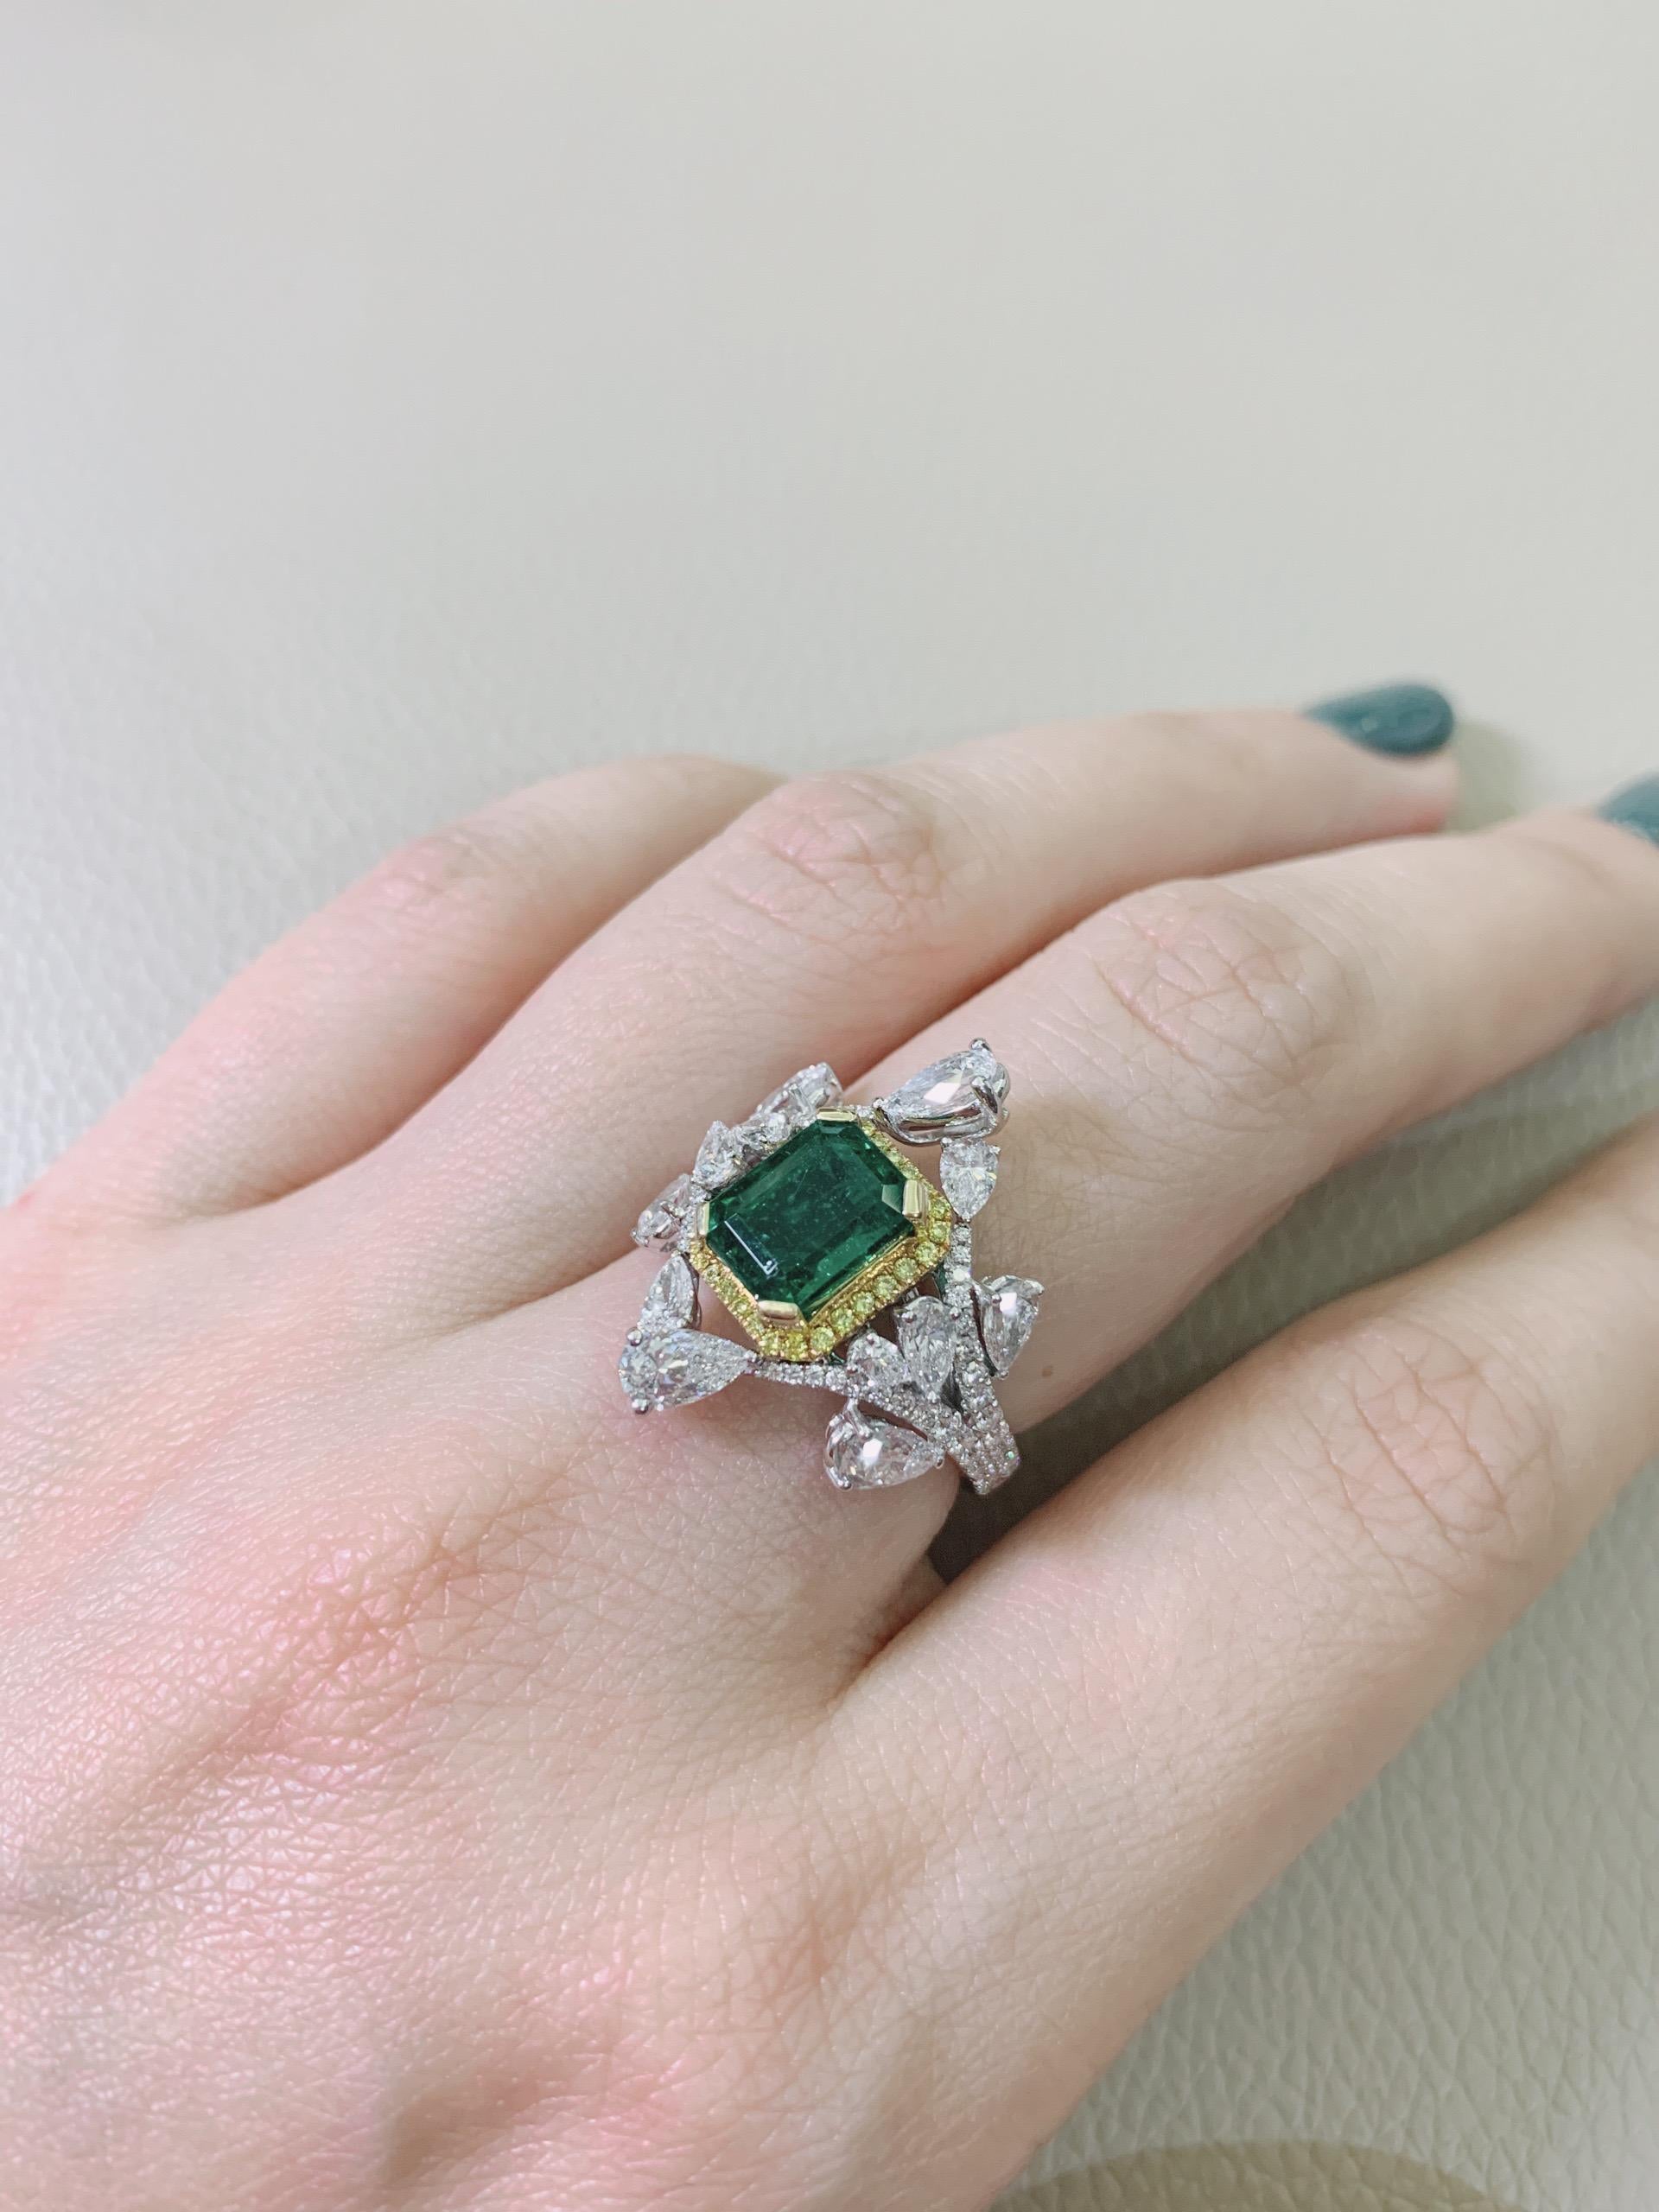 White Gold GRS Certified 2.79 Carat Zambia Emerald Yellow Diamond Ring For Sale 1